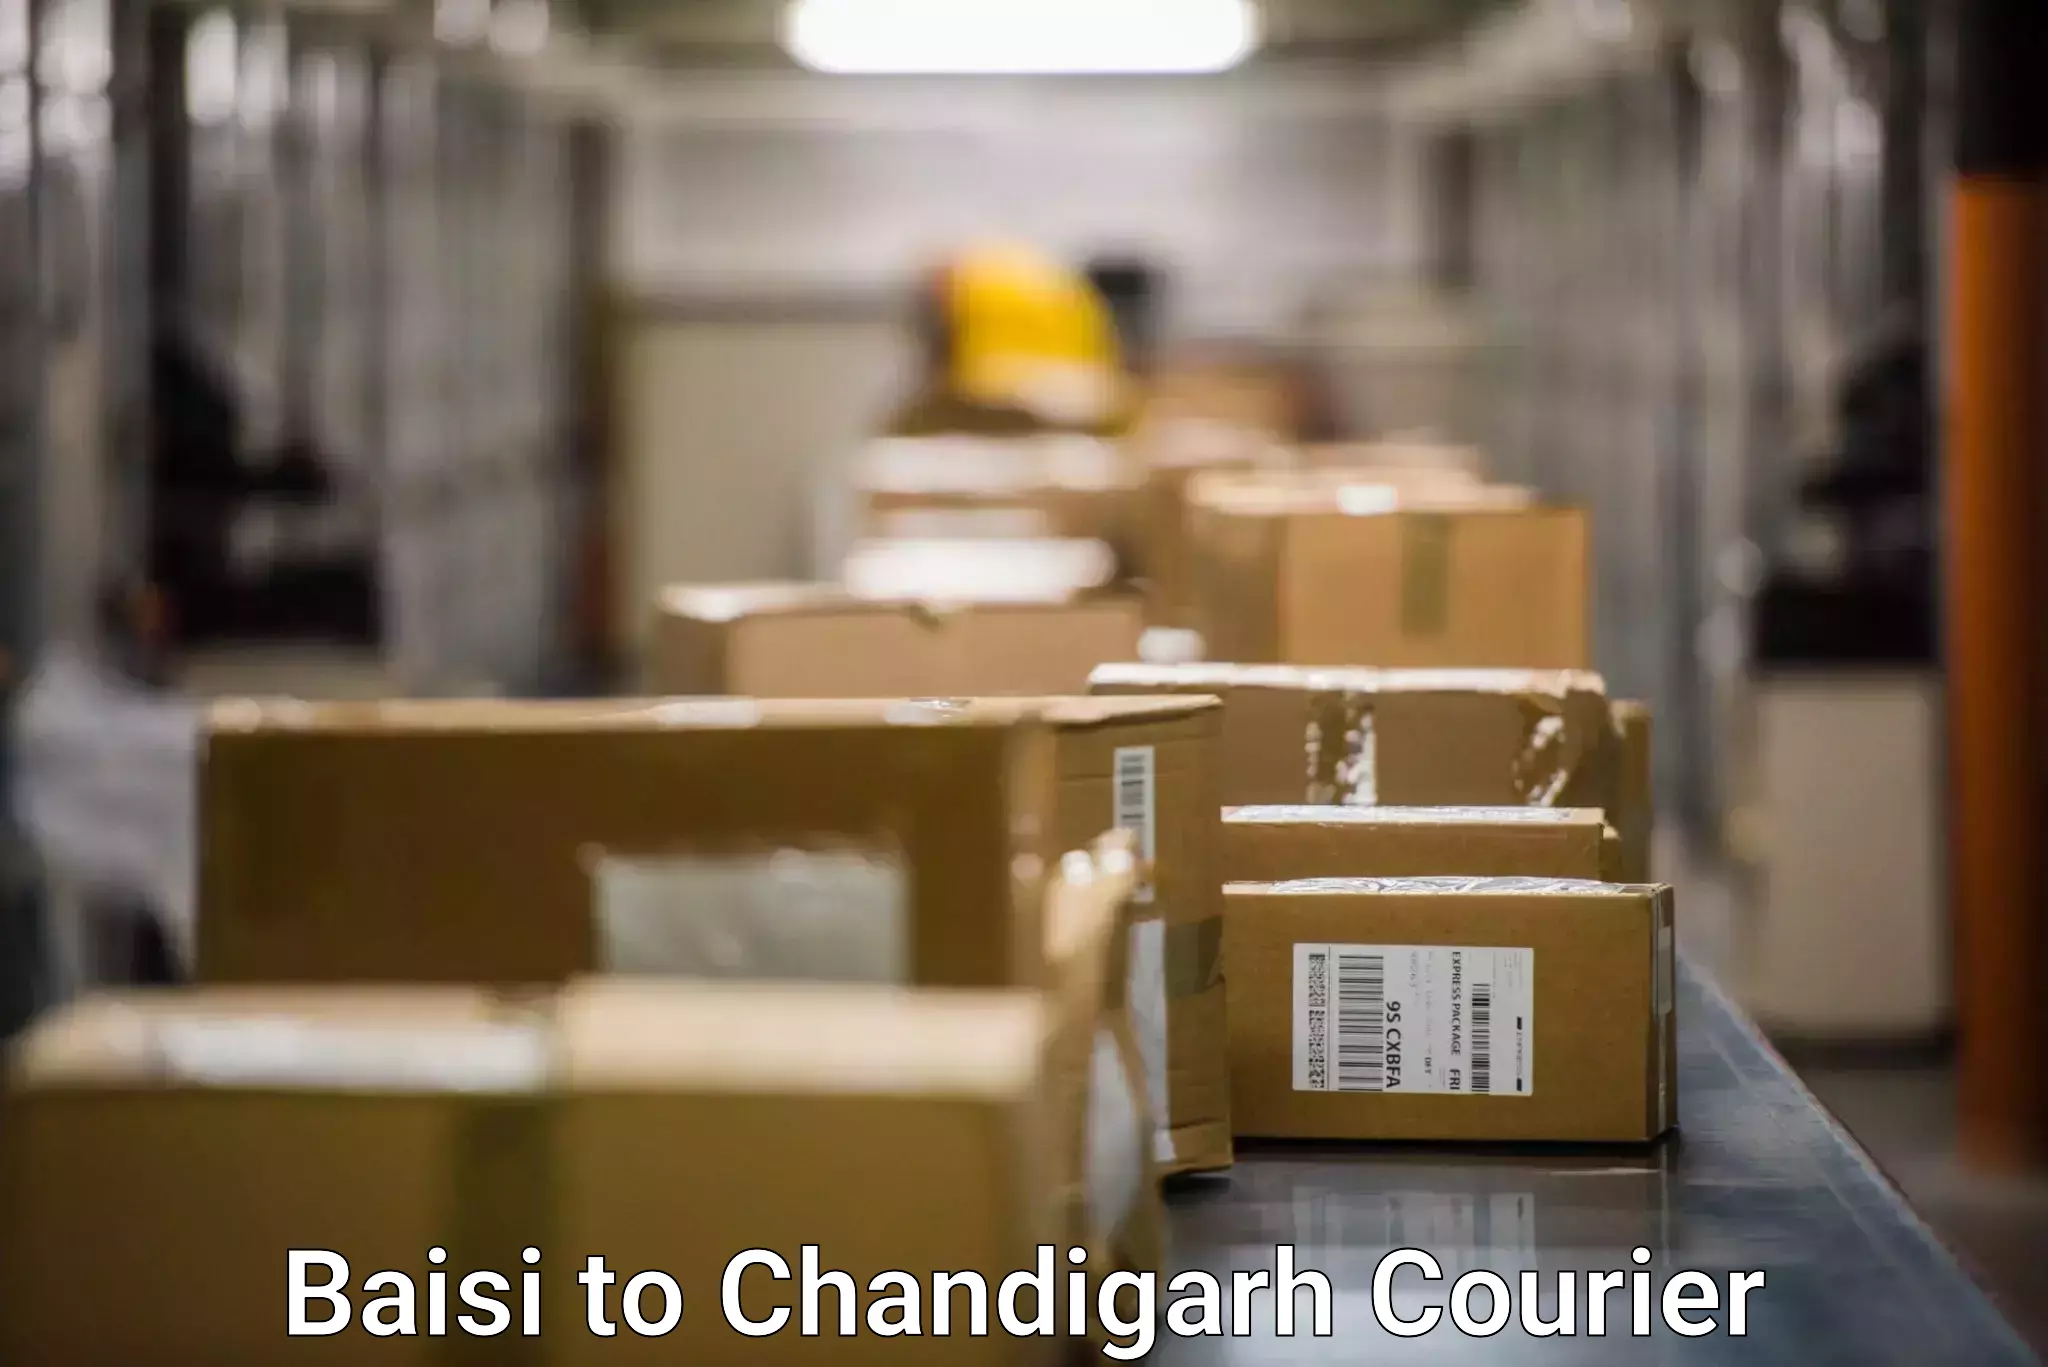 Premium delivery services Baisi to Chandigarh